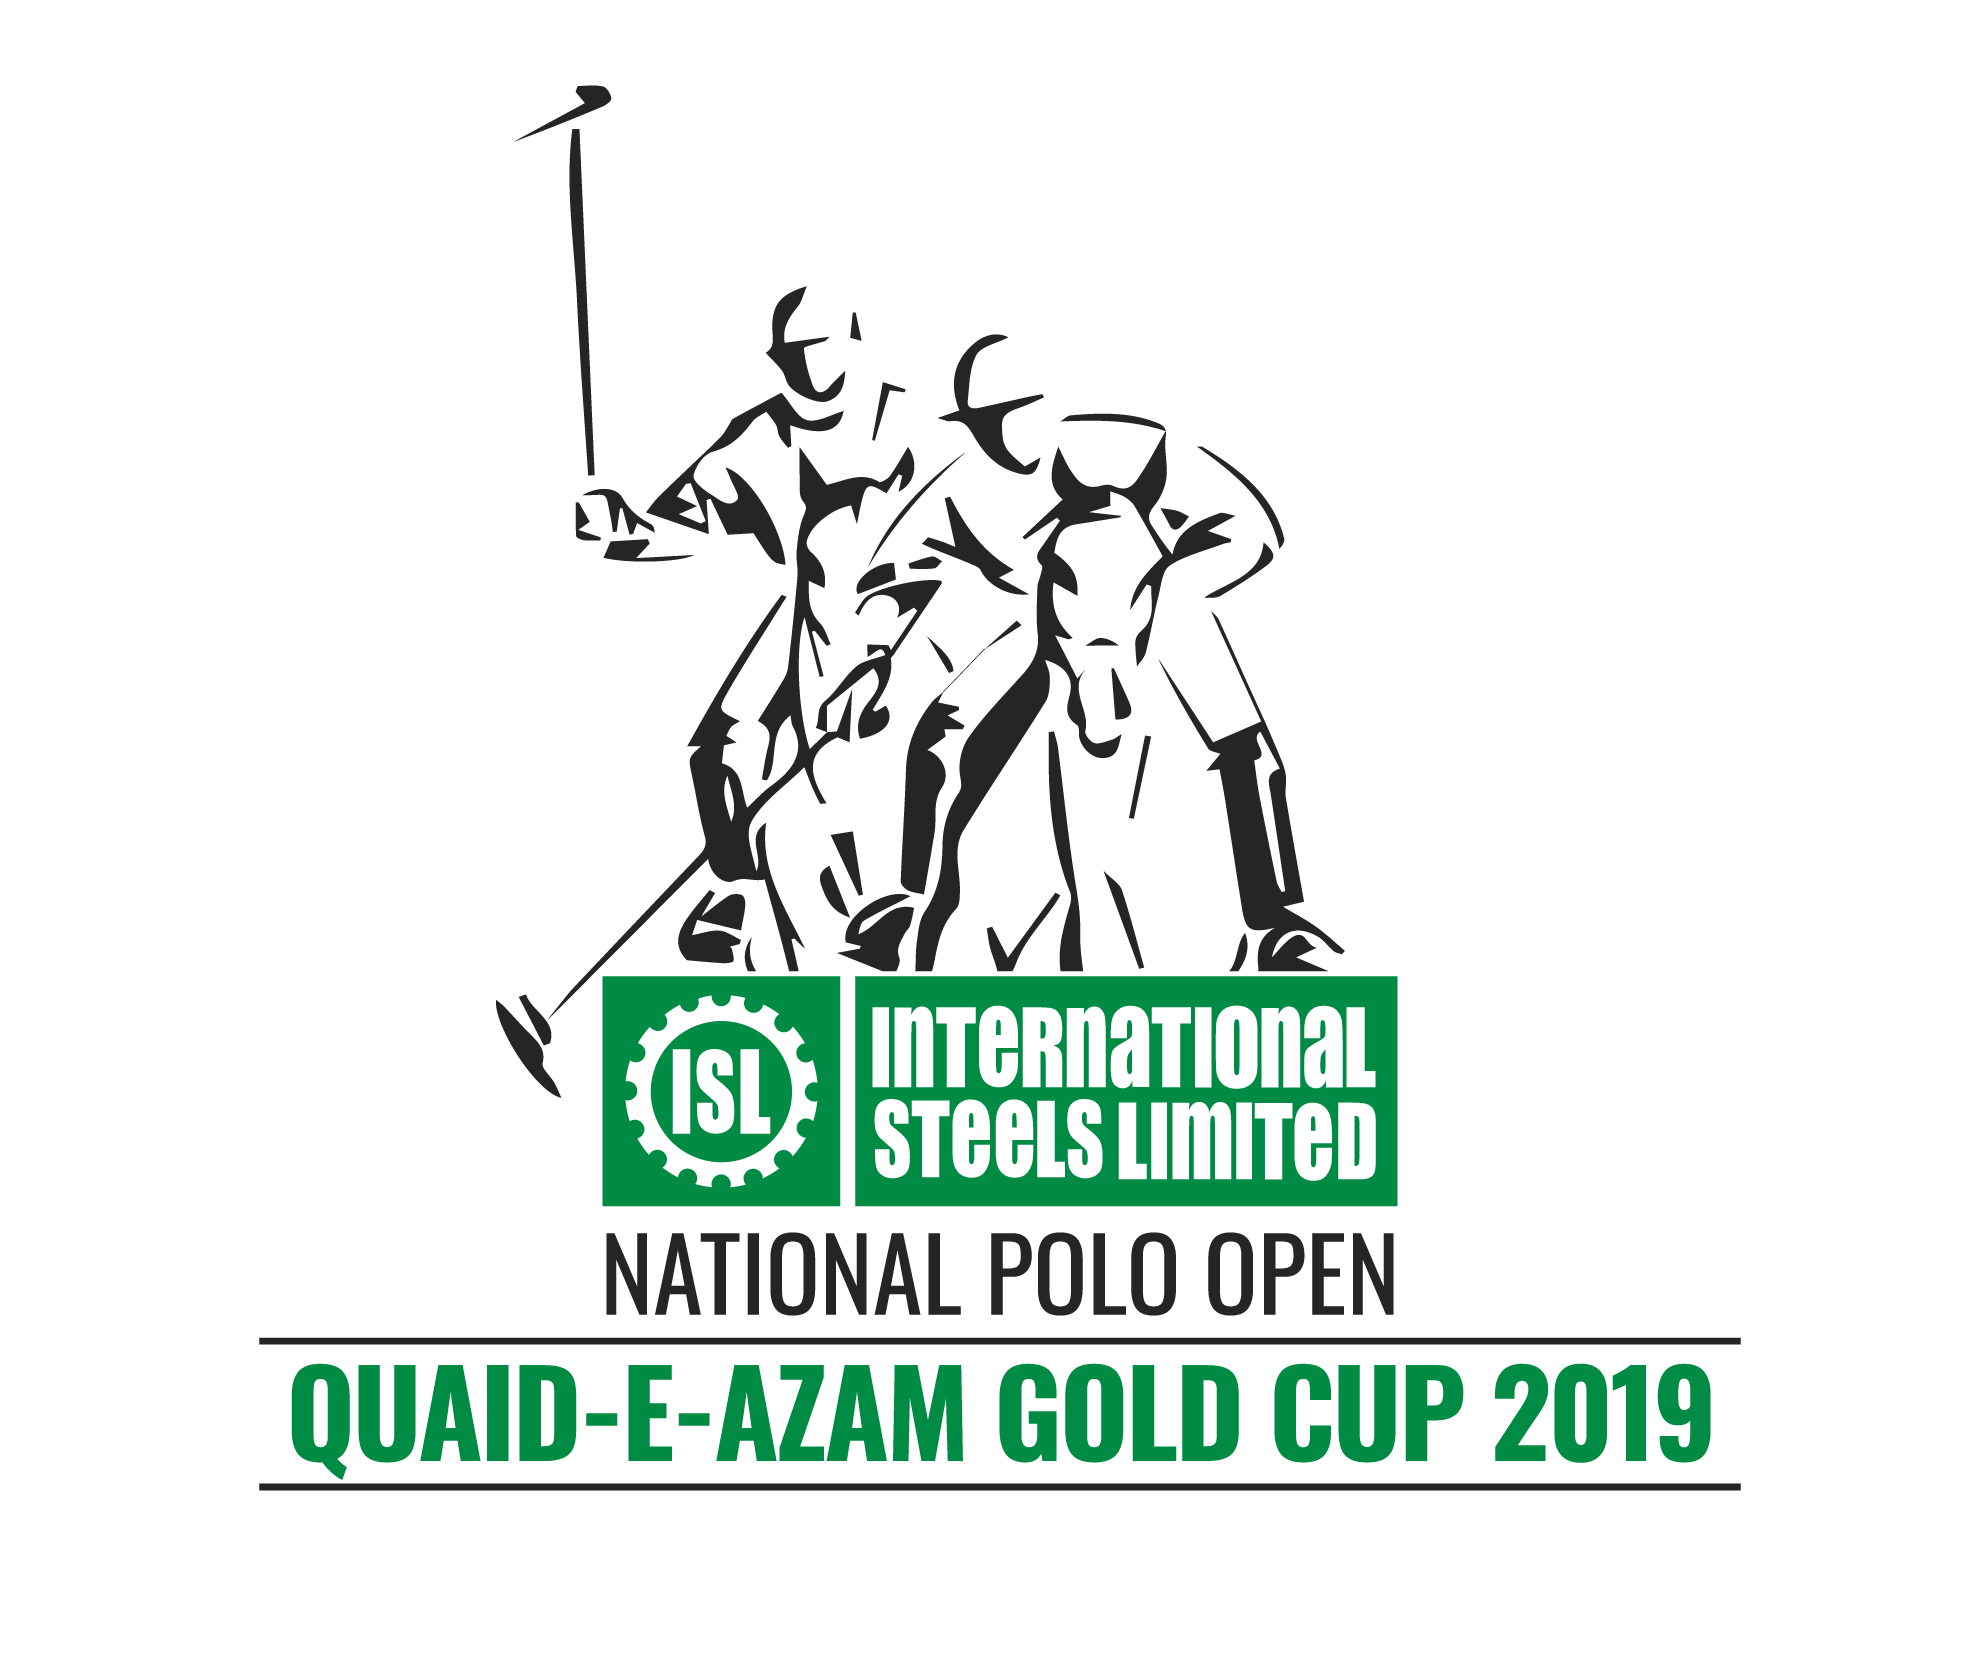 Official-Logo-International-Steels-Limited-National-Open-Polo-Championship-for-the-Quaid-e-Azam-Gold-Cup-2019-F